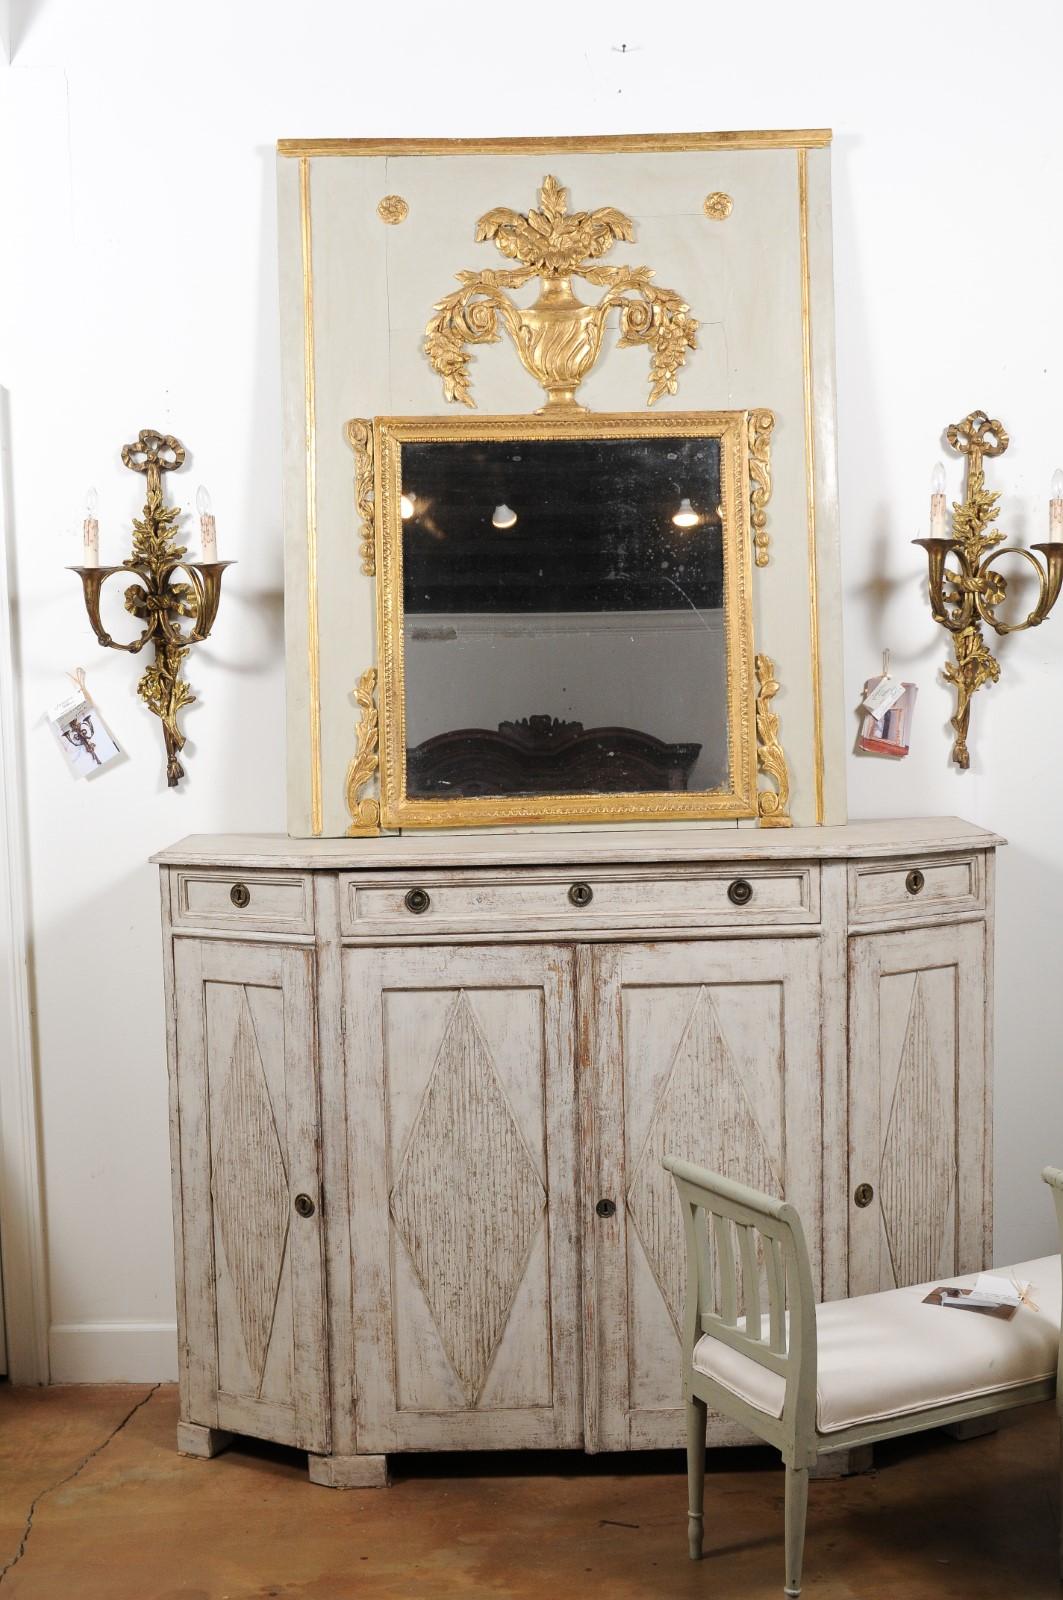 Louis XVI French 1775 Transition Period Painted and Gilt Trumeau Mirror with Carved Urn For Sale